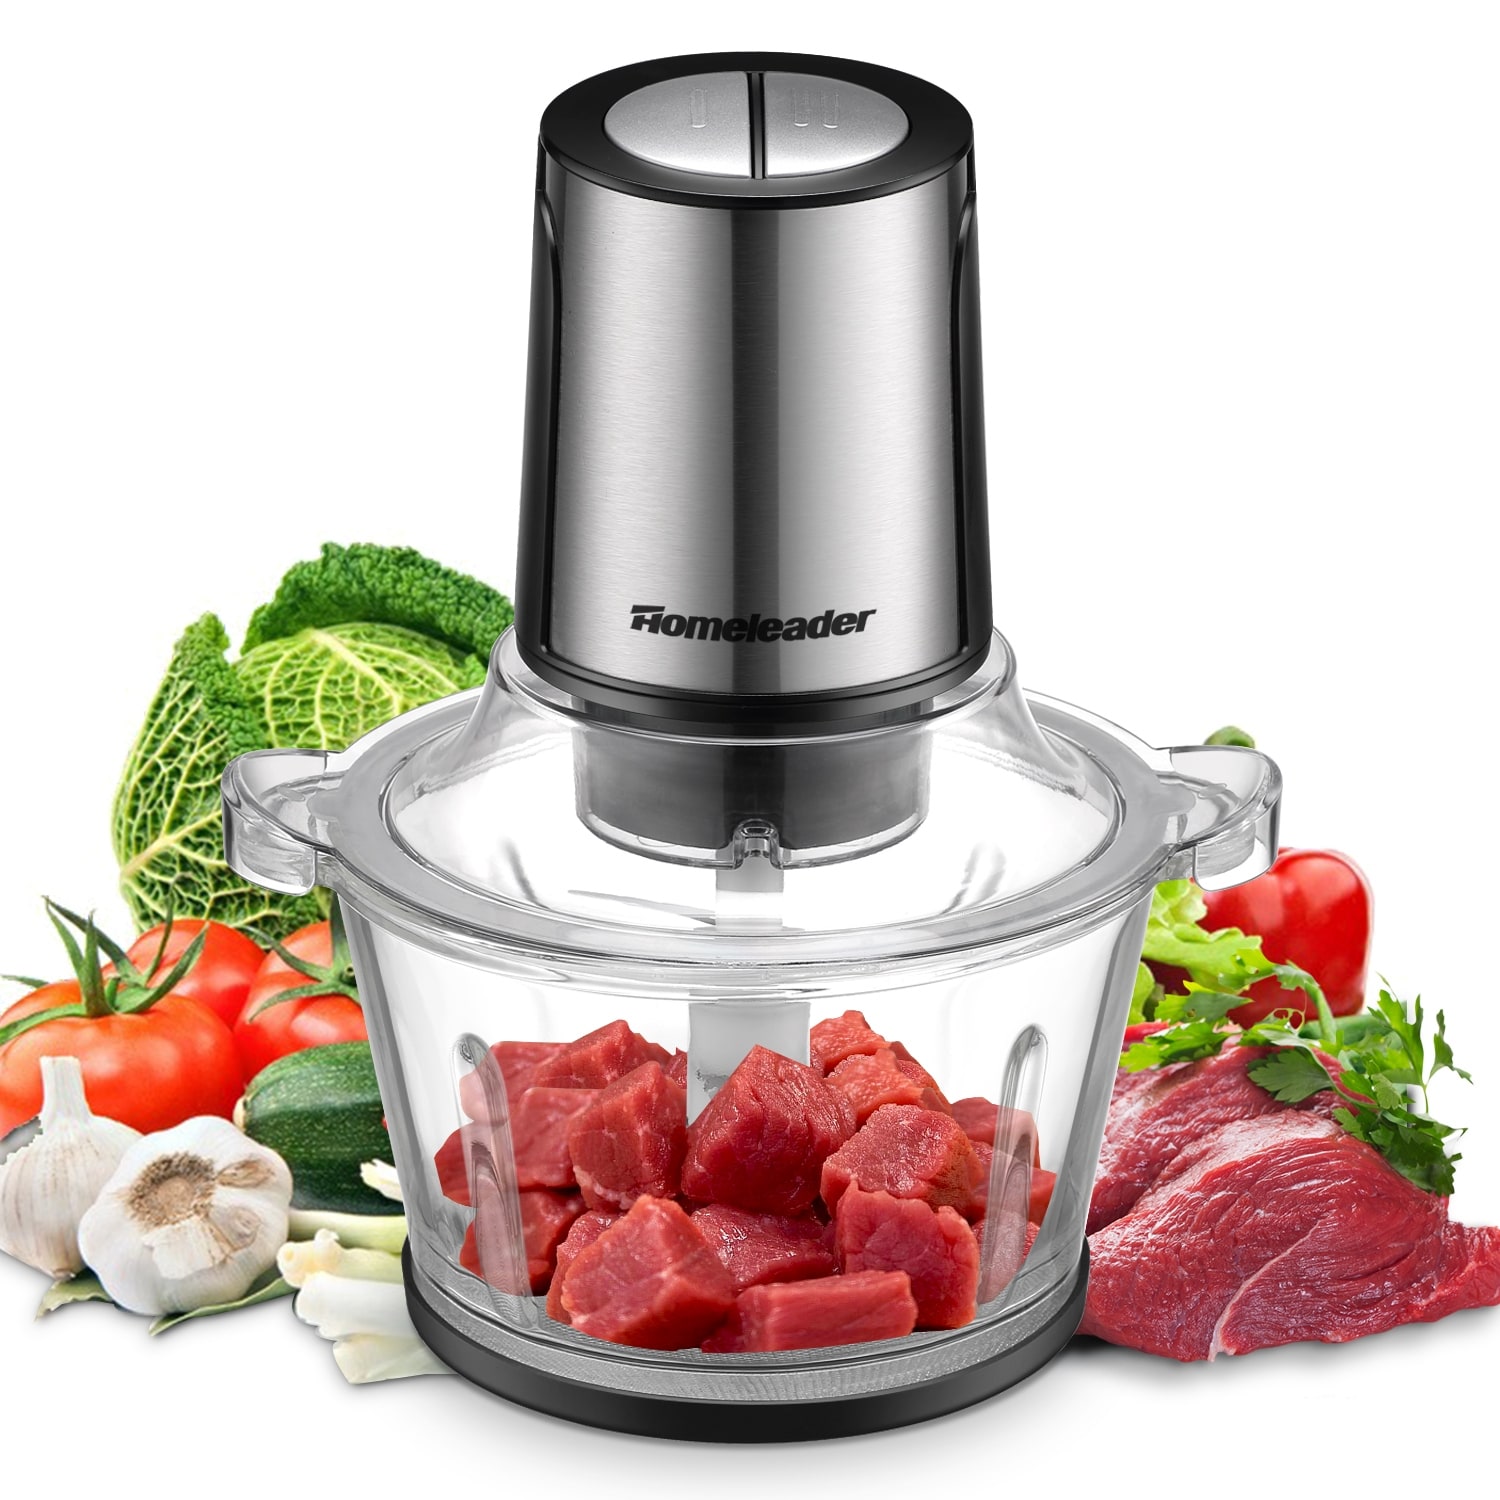 https://ak1.ostkcdn.com/images/products/is/images/direct/c31e375f239f43262c75778ee1595033d146007b/Electric-Food-Chopper%2C-8-Cup-Food-Processor-by-Homeleader%2C-2L-BPA-Free-Glass-Bowl-Blender-Grinder.jpg